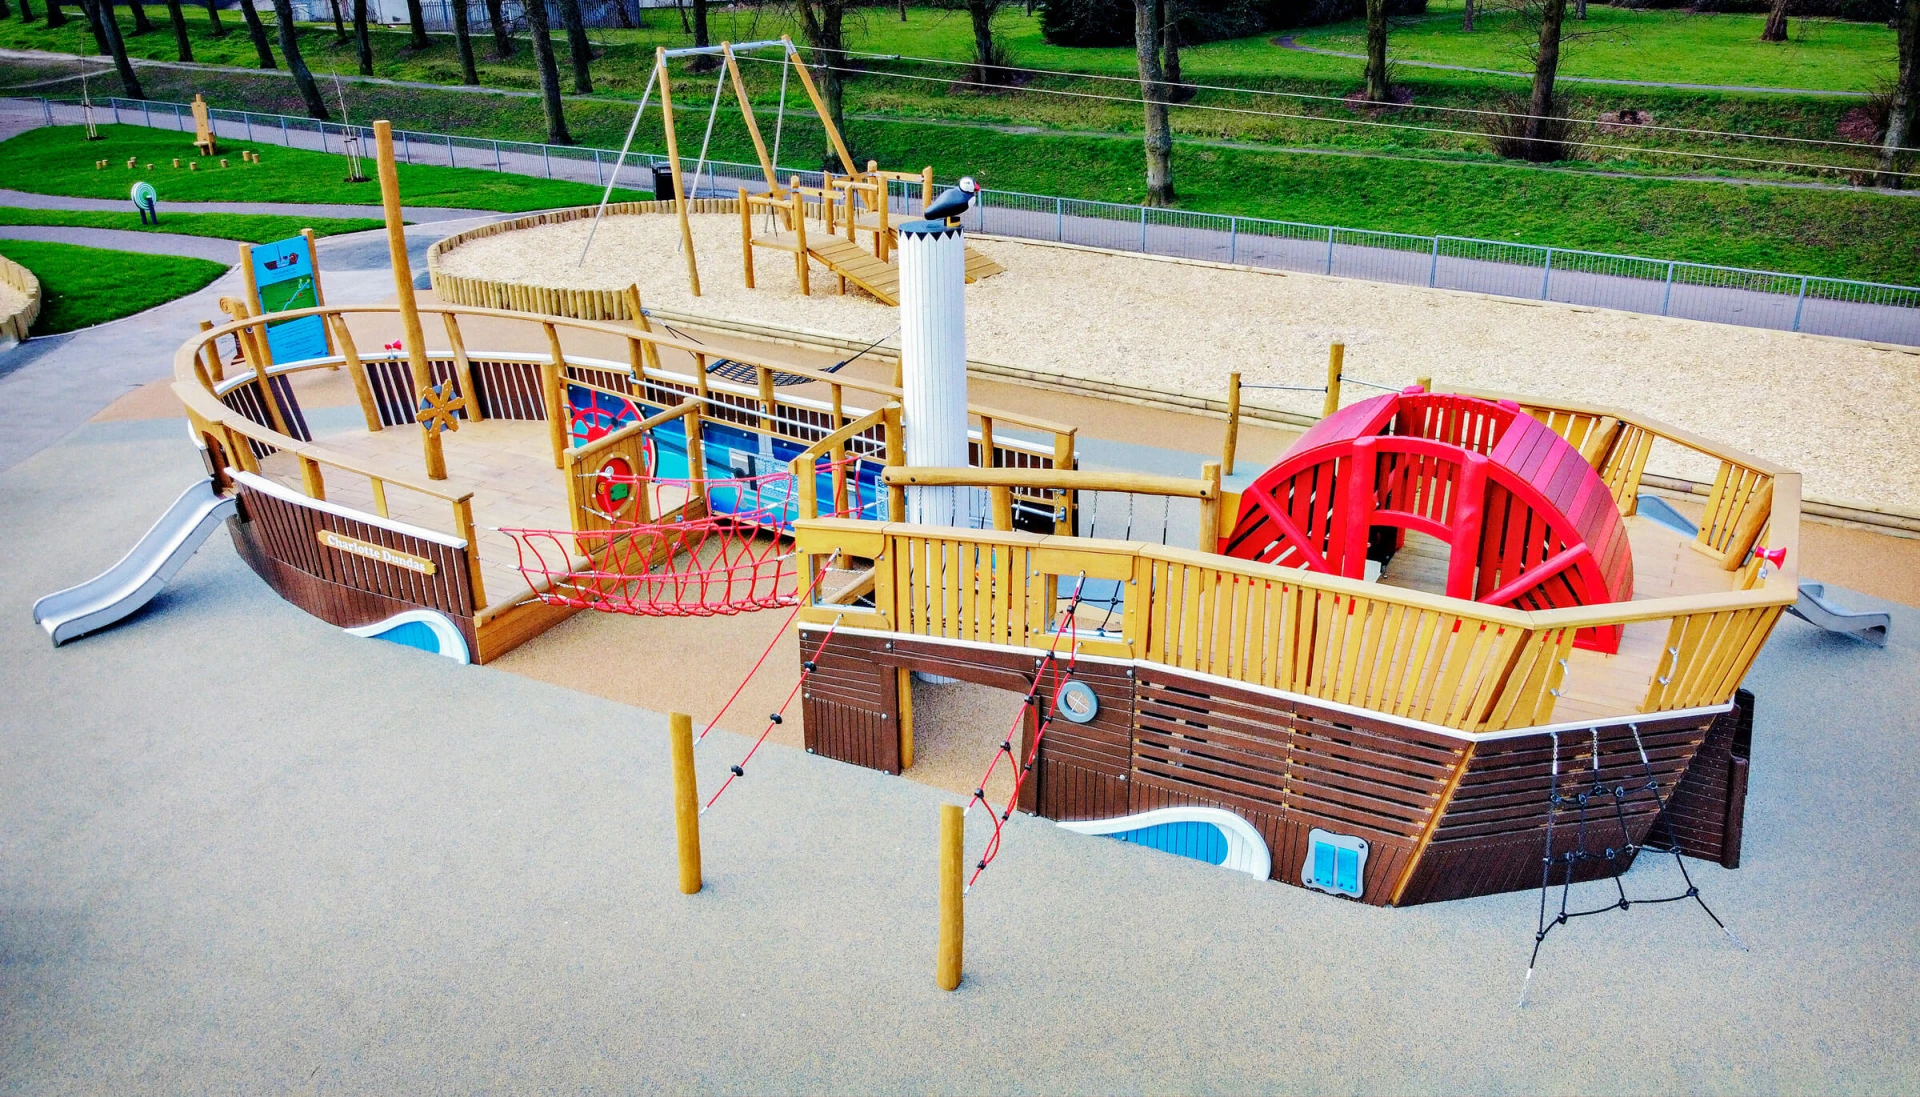 Playground steam bout customised ship in Zetland Park